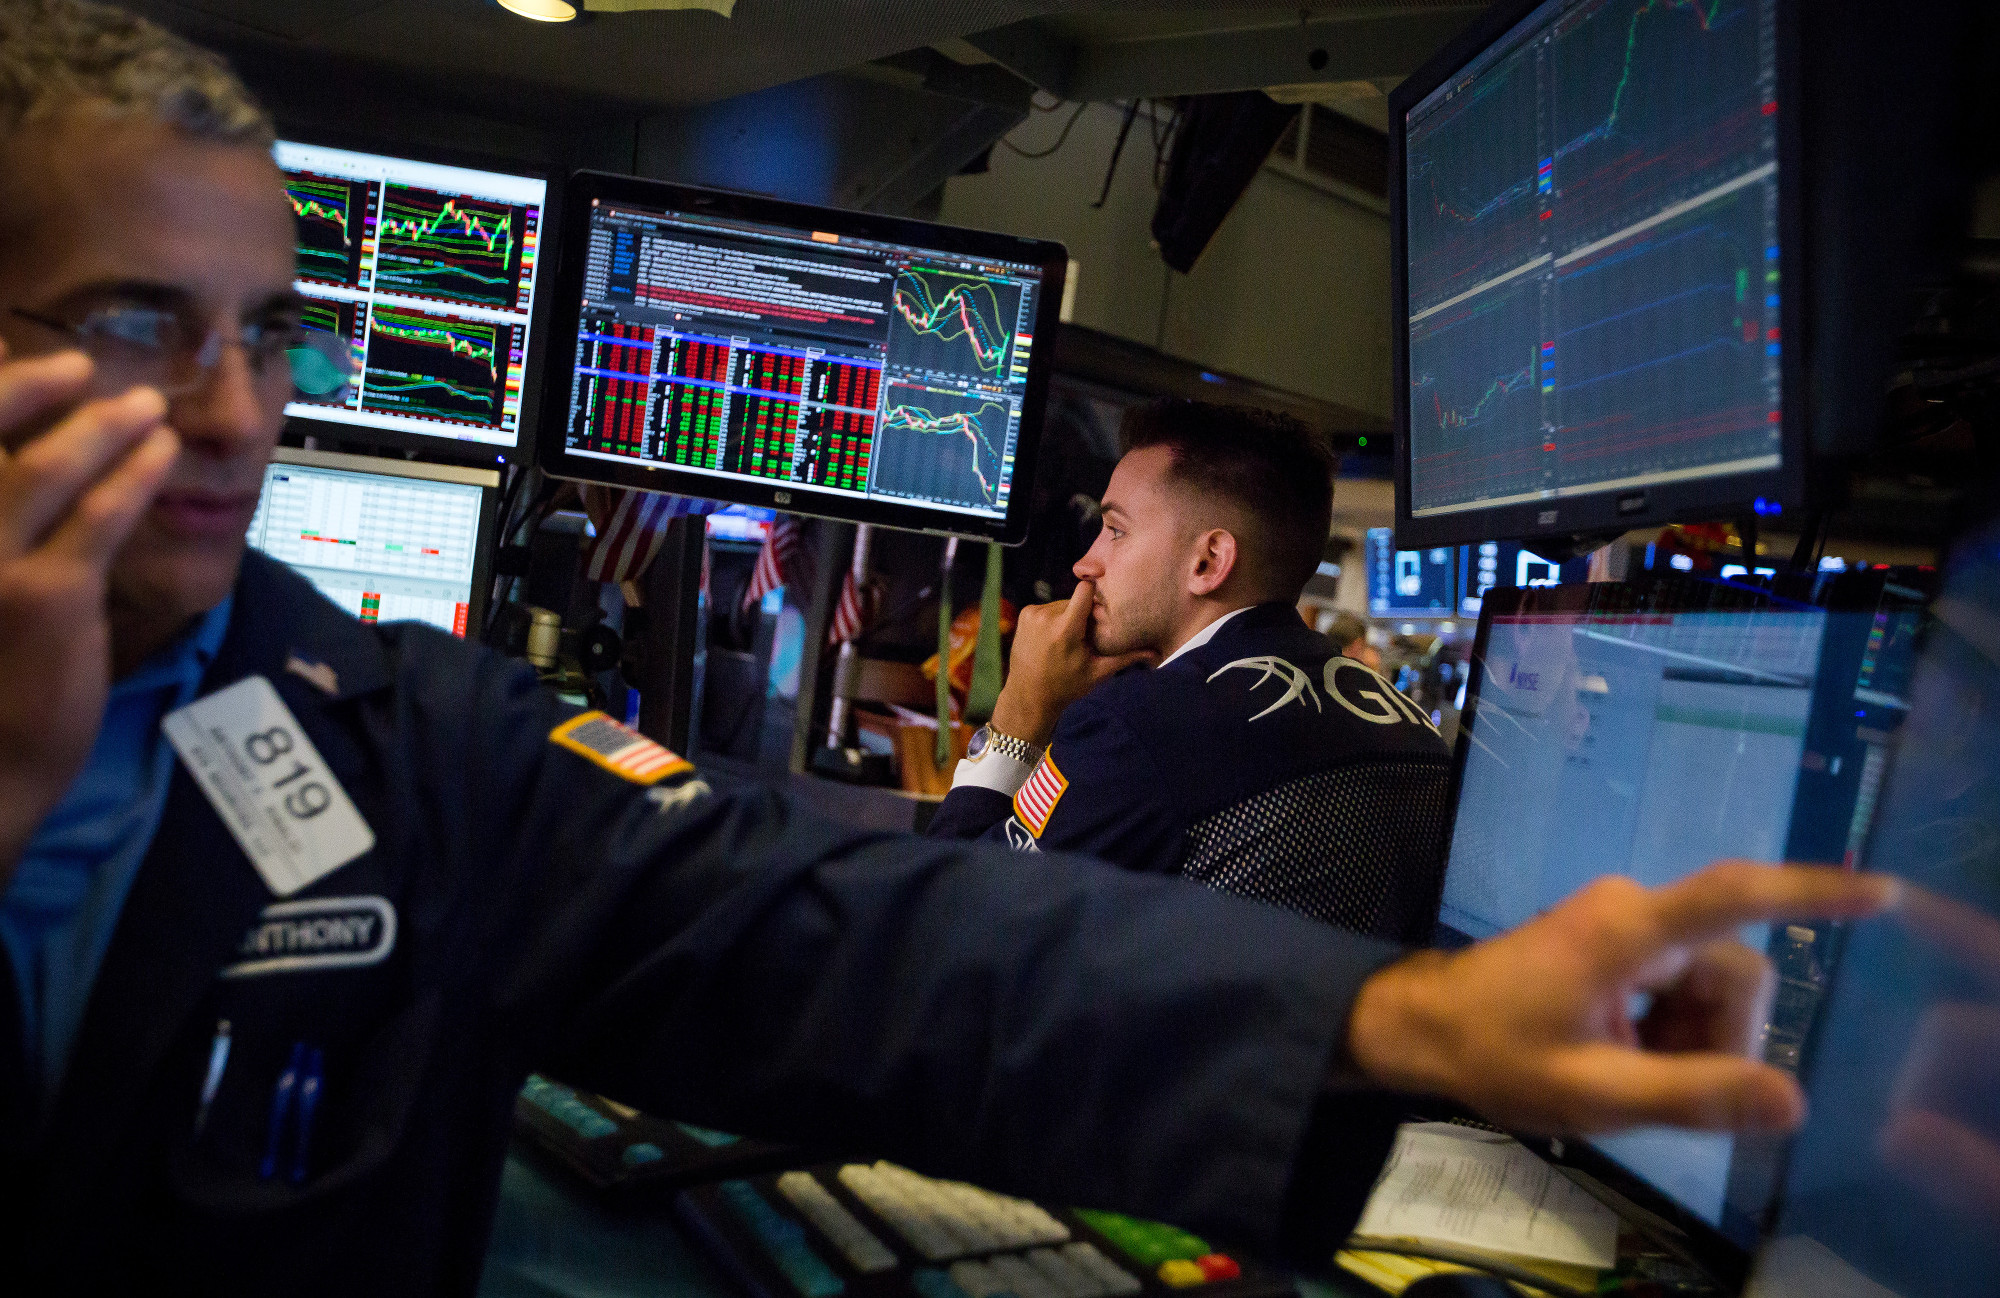 Trading On The Floor Of The NYSE As Tech Leads U.S. Stock Gain